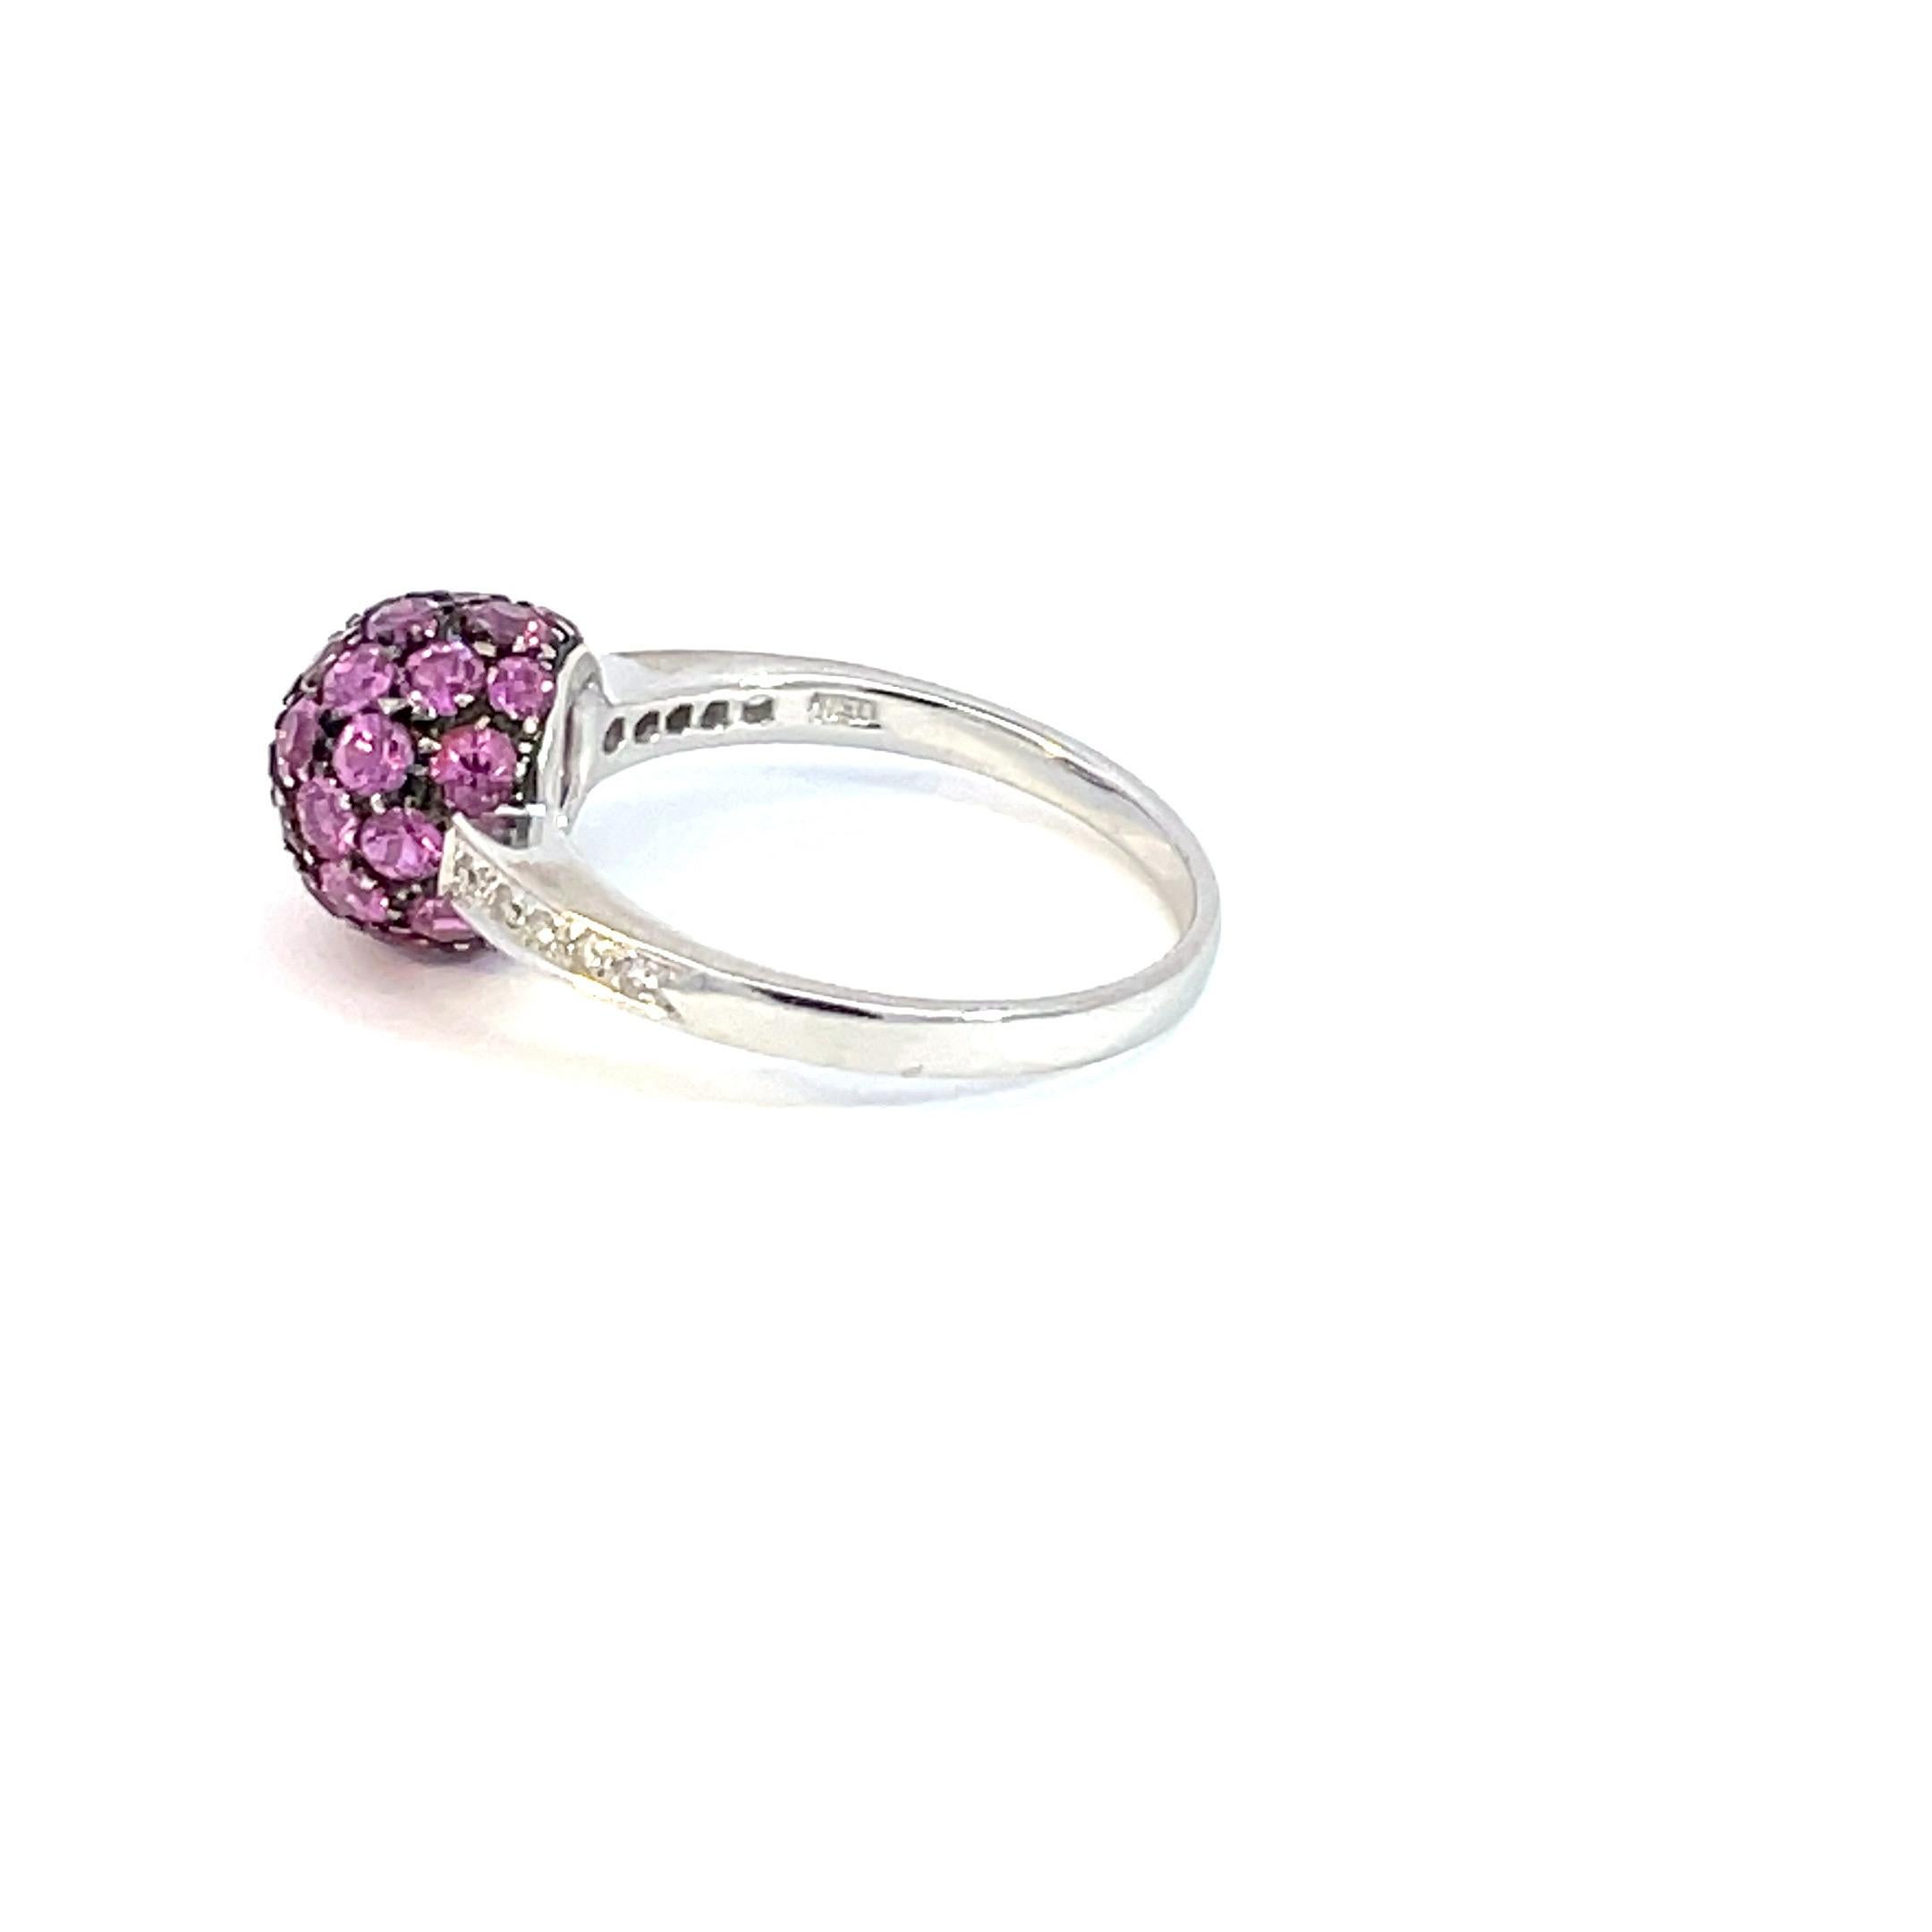 One 18kt white gold, natural pink sapphires and diamond ball ring with a black rhodium finish around the pink sapphires.

35 natural pink sapphires 1.05ct total weight 

10 brilliant cut diamonds 0.20ct total weight

18kt white gold 4.2 grams total